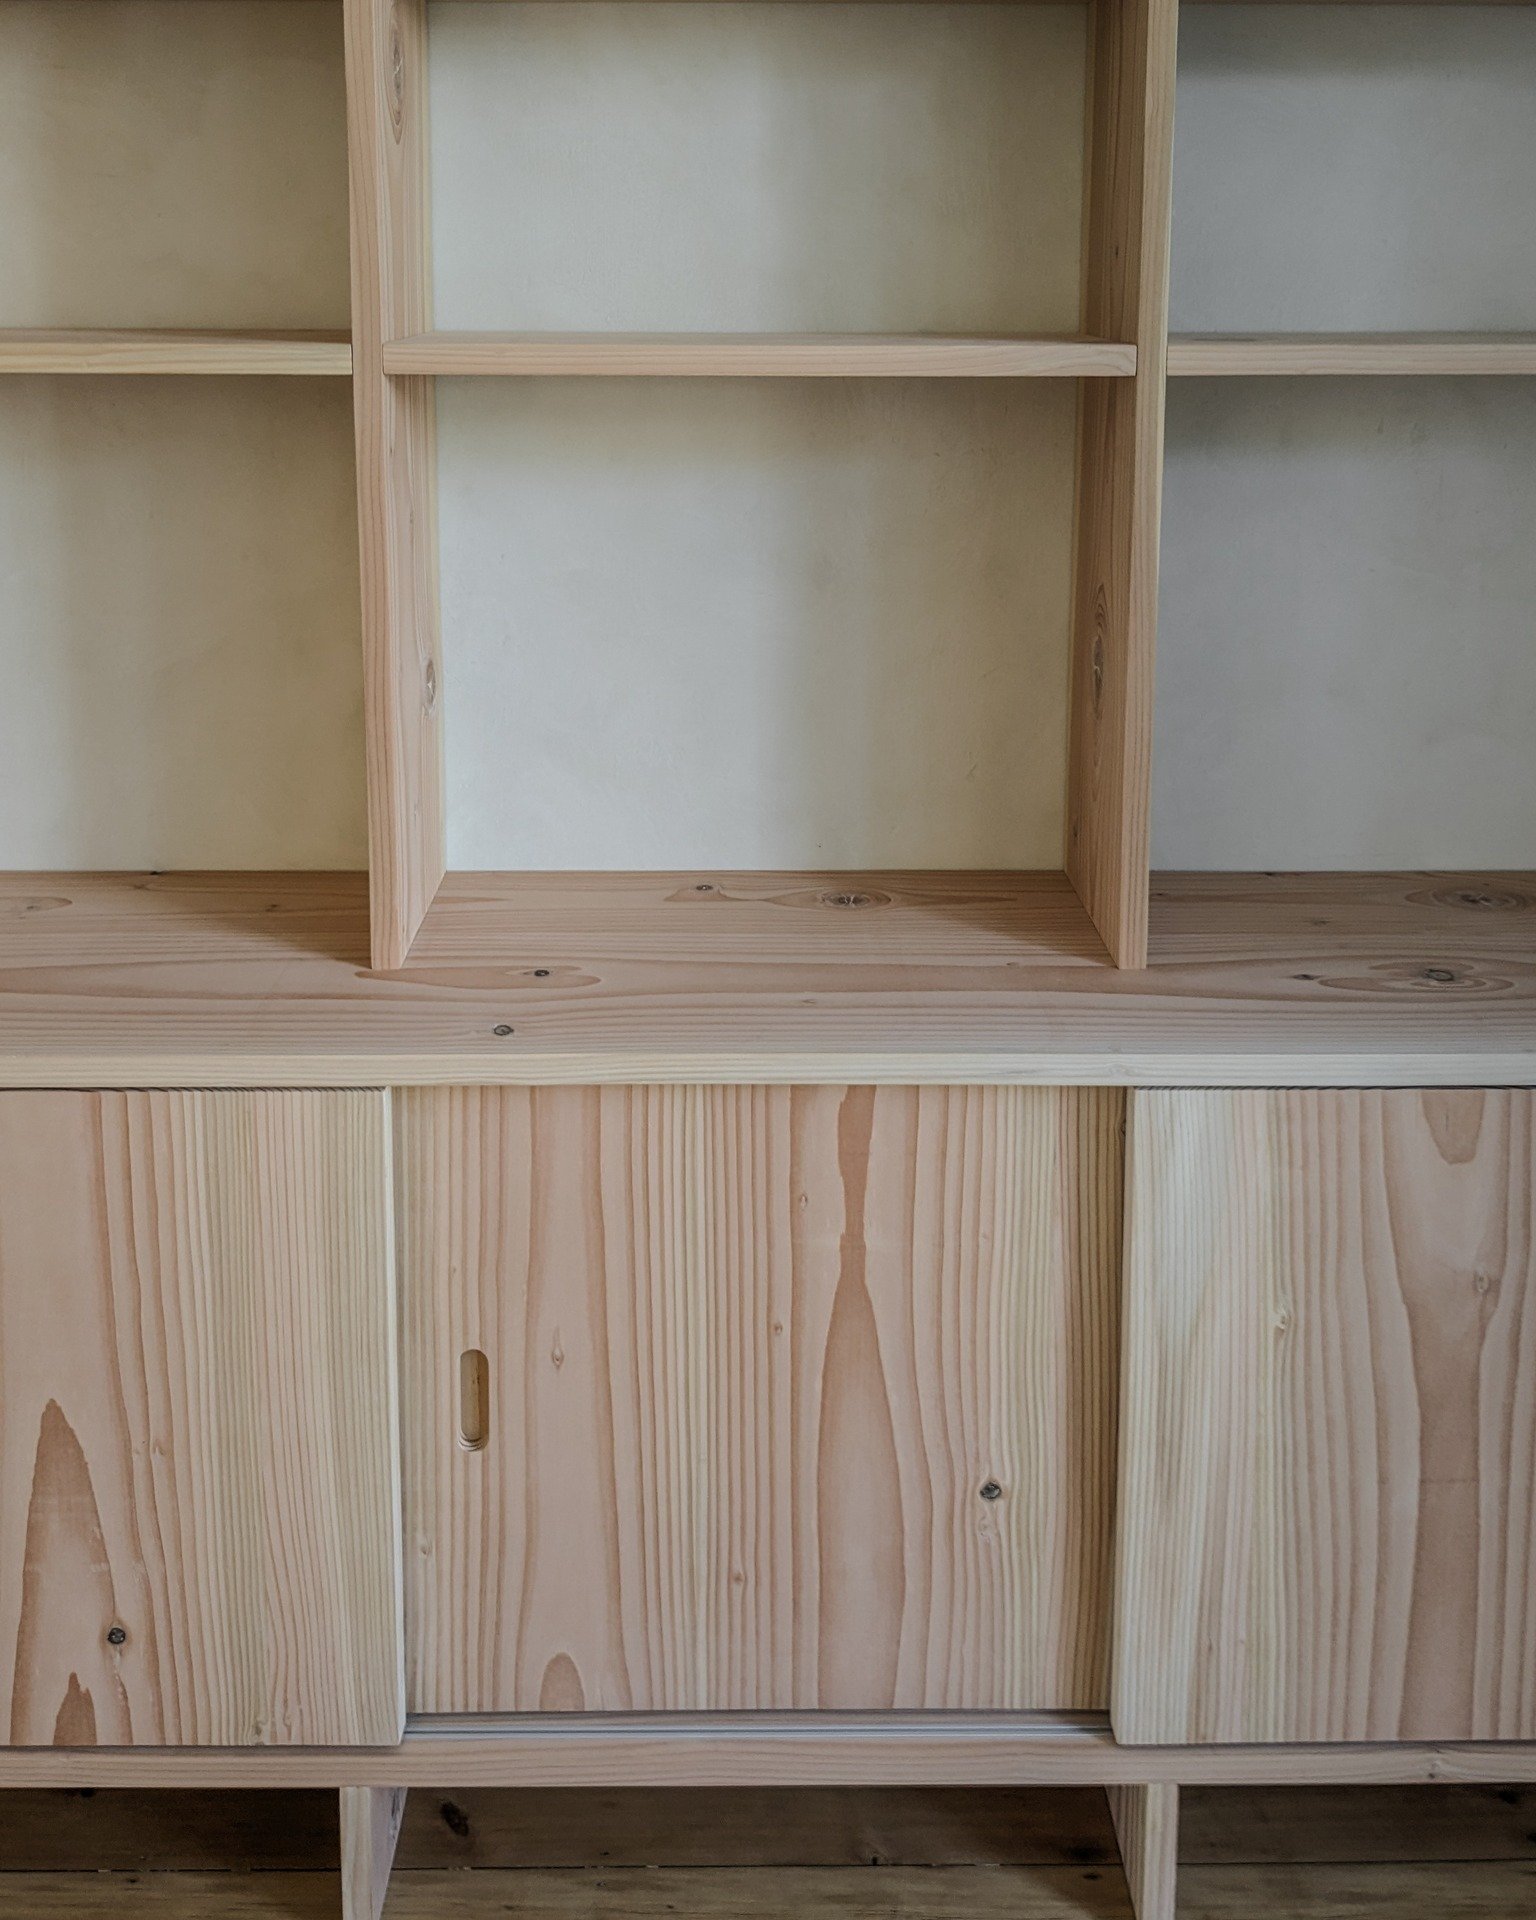 Detail shots of this solid wood Douglas Fir freestanding cupboard and bookcase. The warm pink hue of the Douglas was chosen to compliments this Victorian townhouses color palette and wooden floors.

A few key features:
- Freestanding shelving unit ma